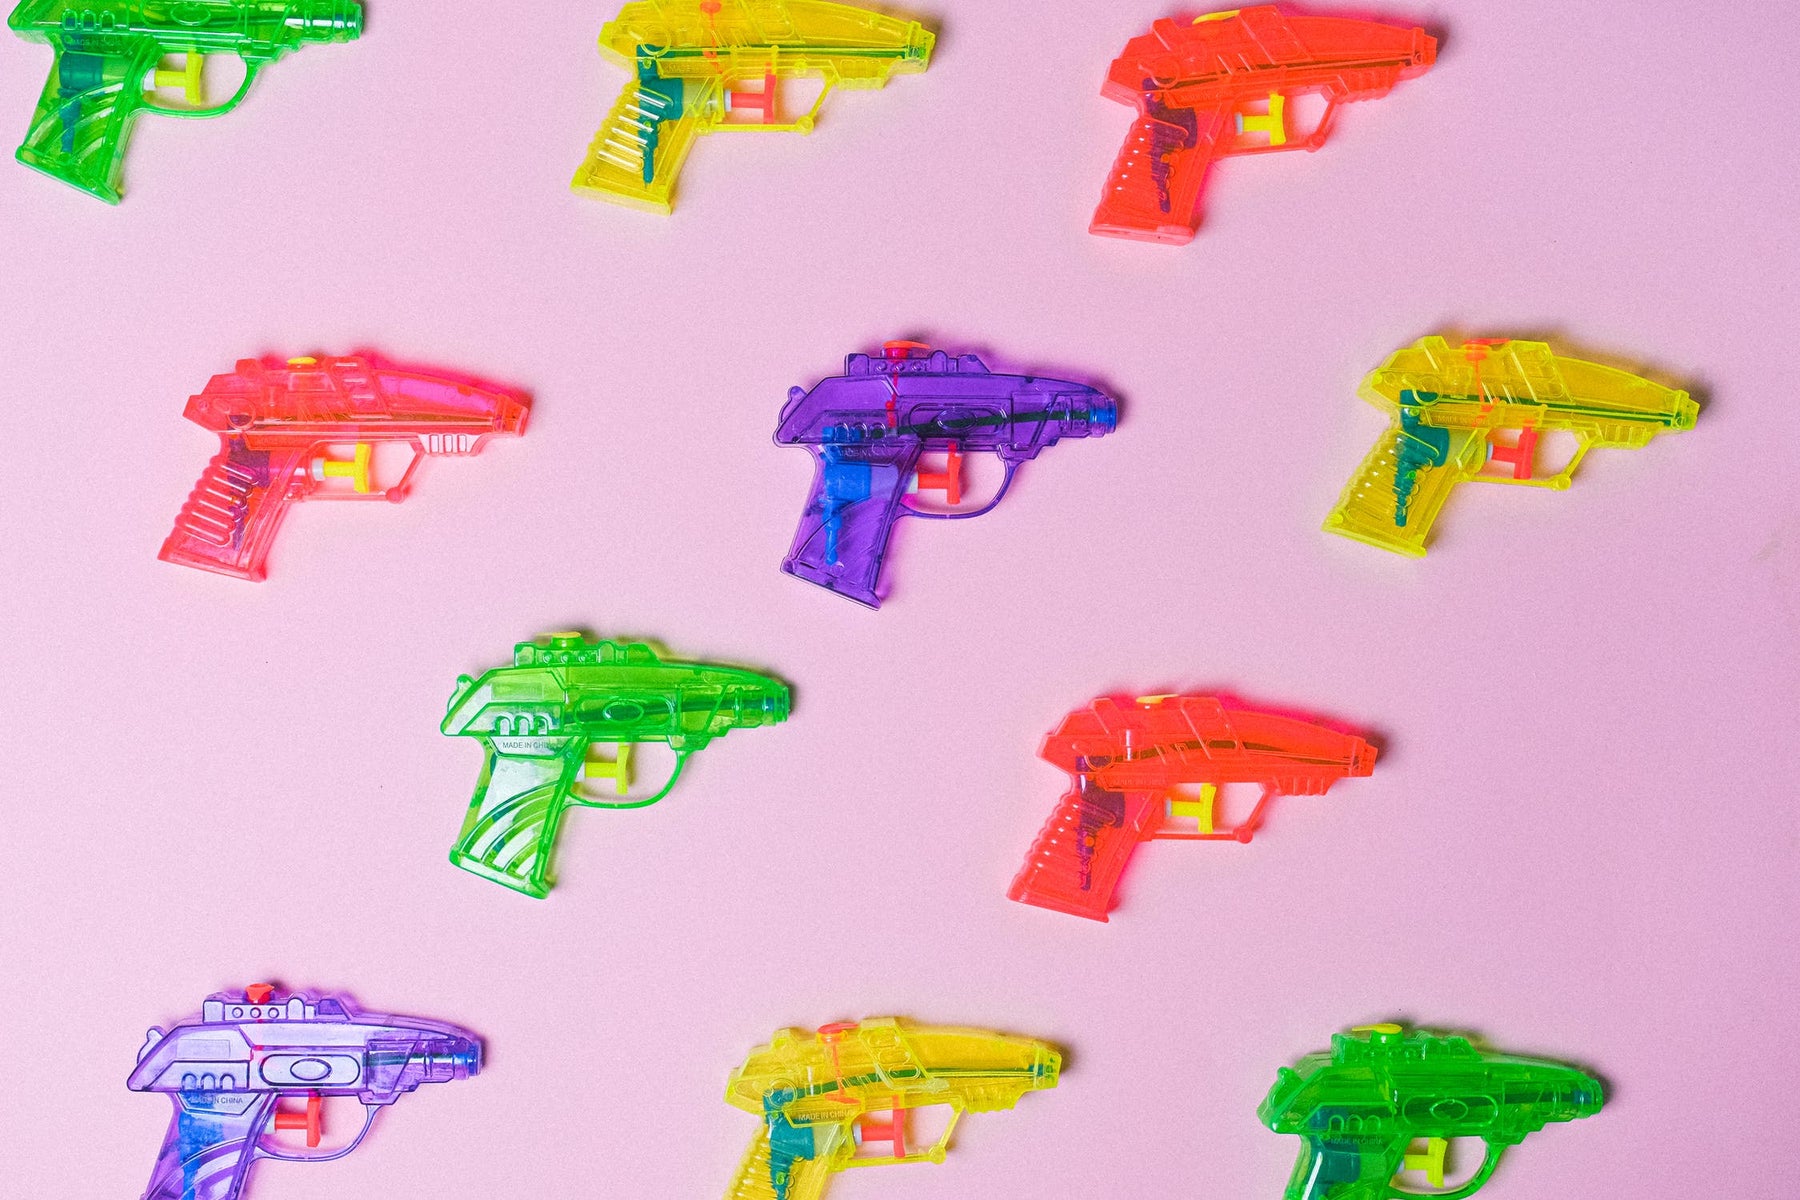 Using Toy Guns And Weapons For Your Portable Photo Booth Props